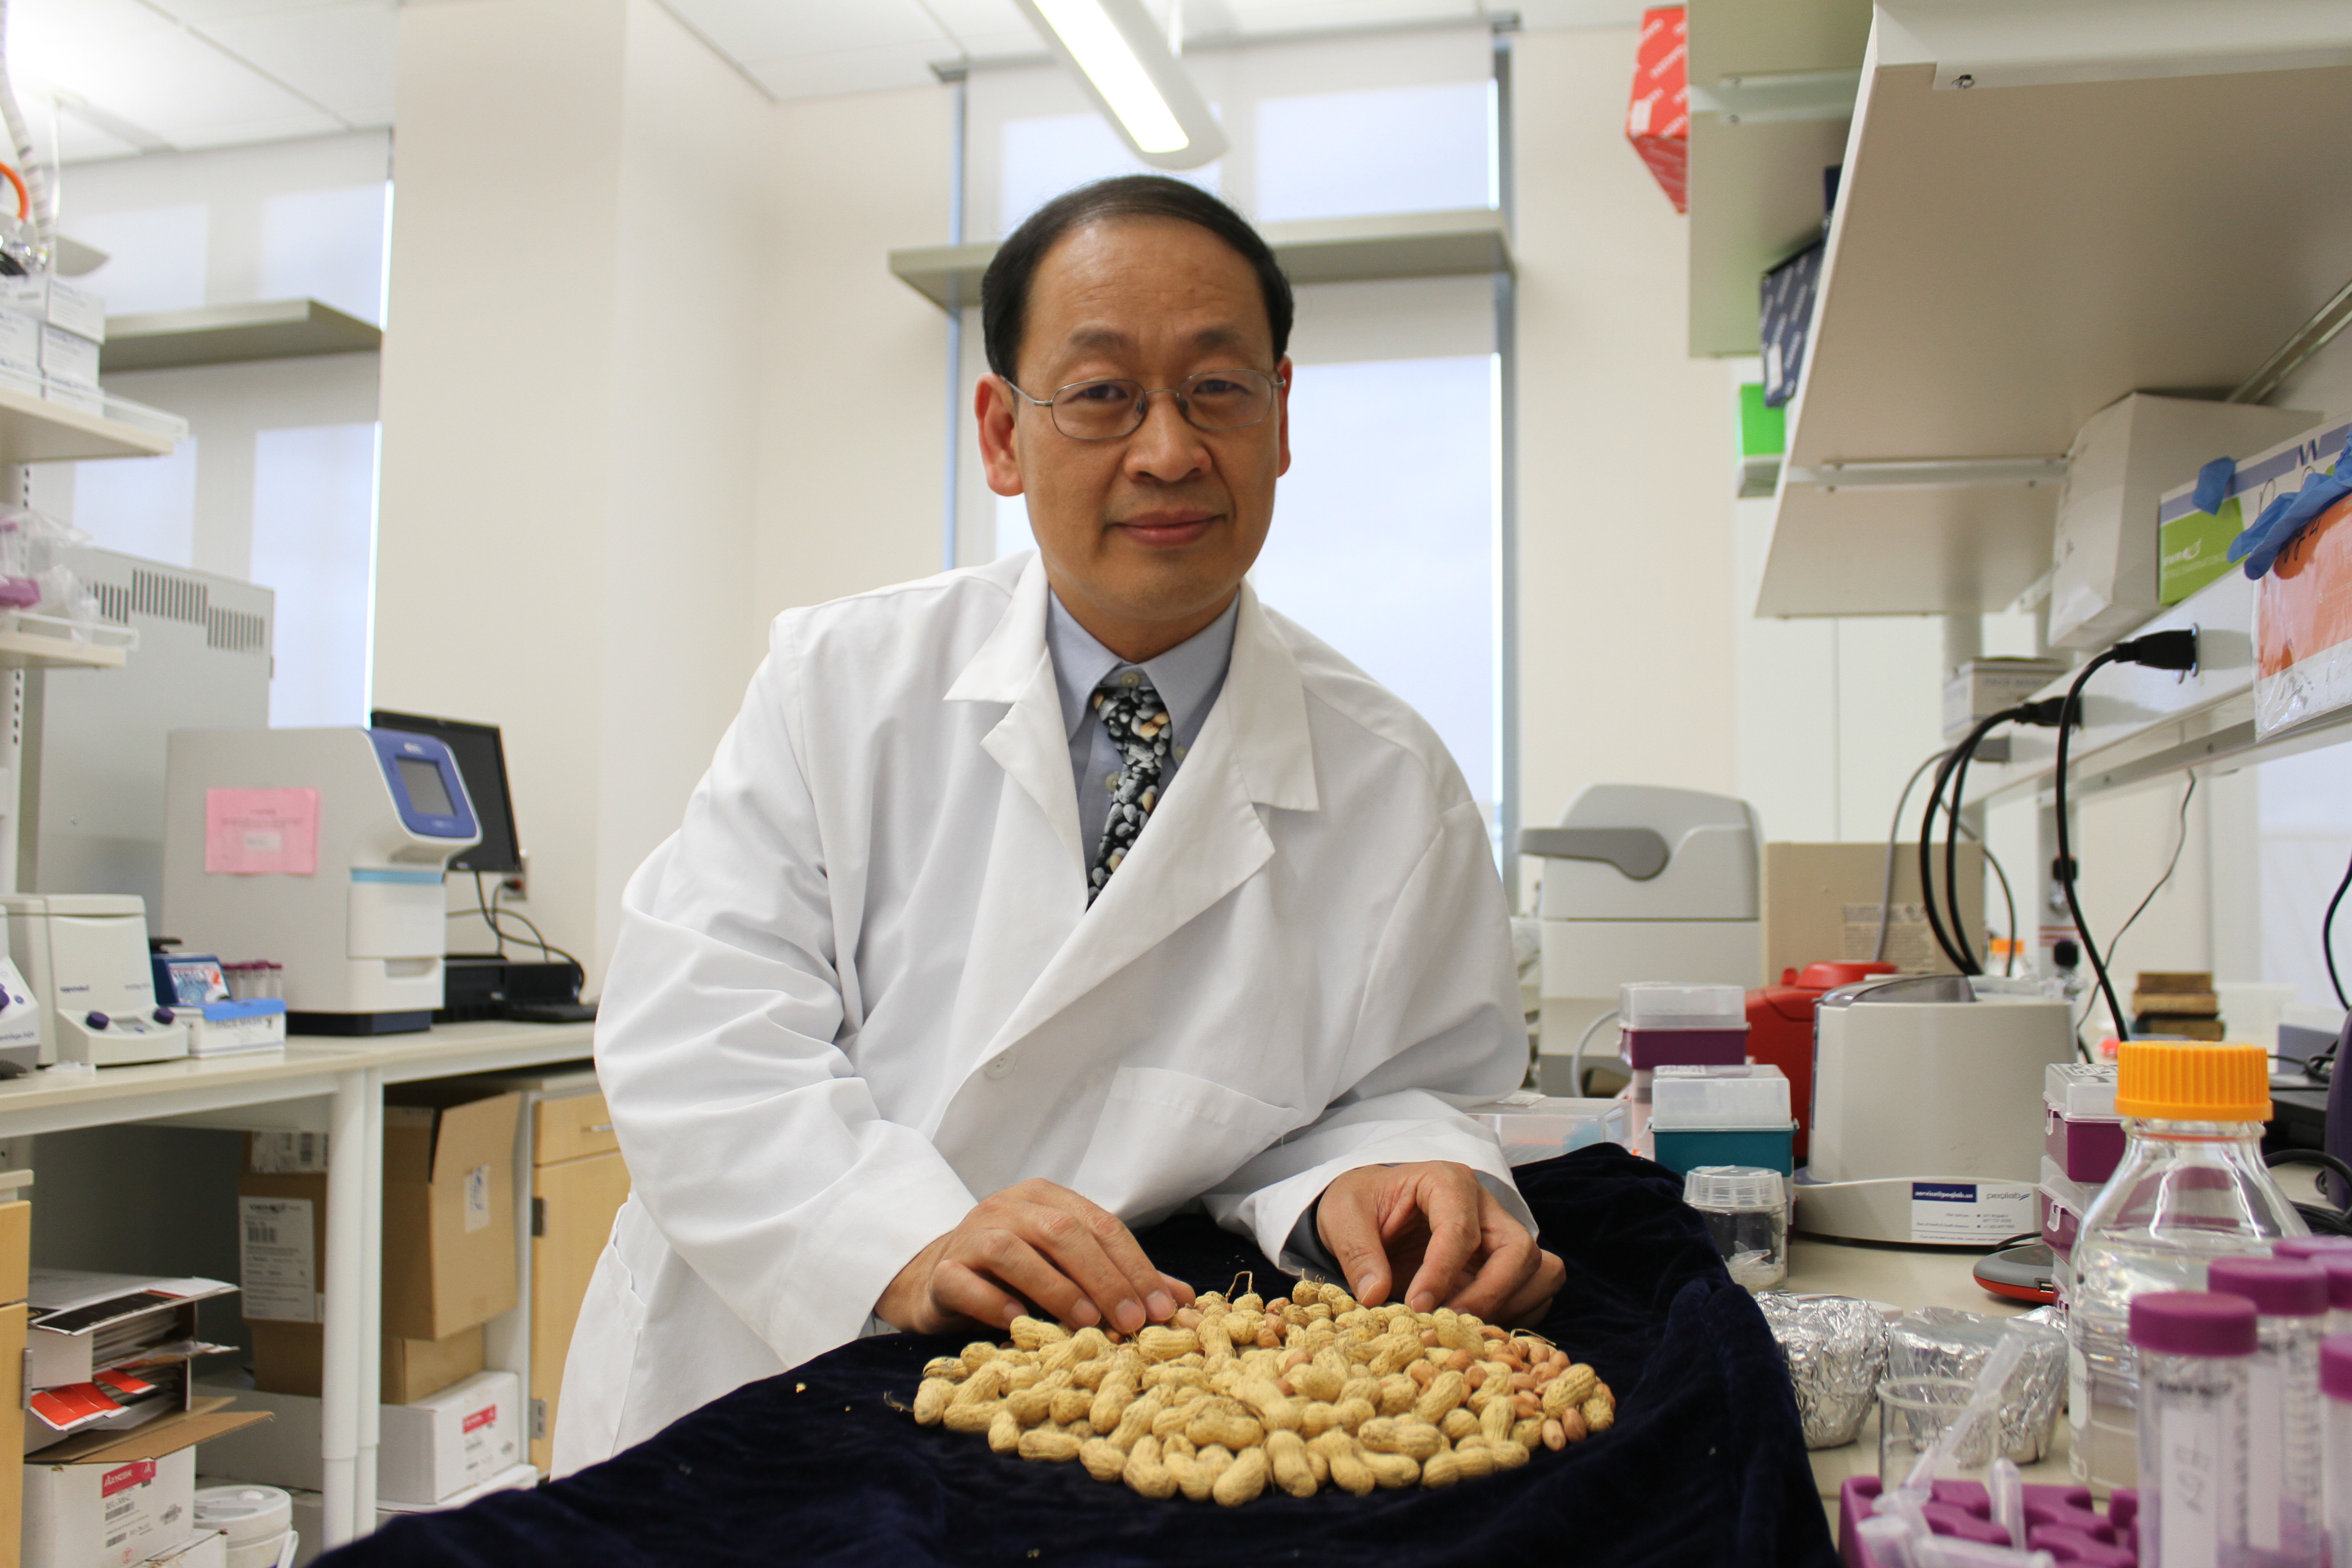 Professor Charles Chen in his lab, displaying peanuts